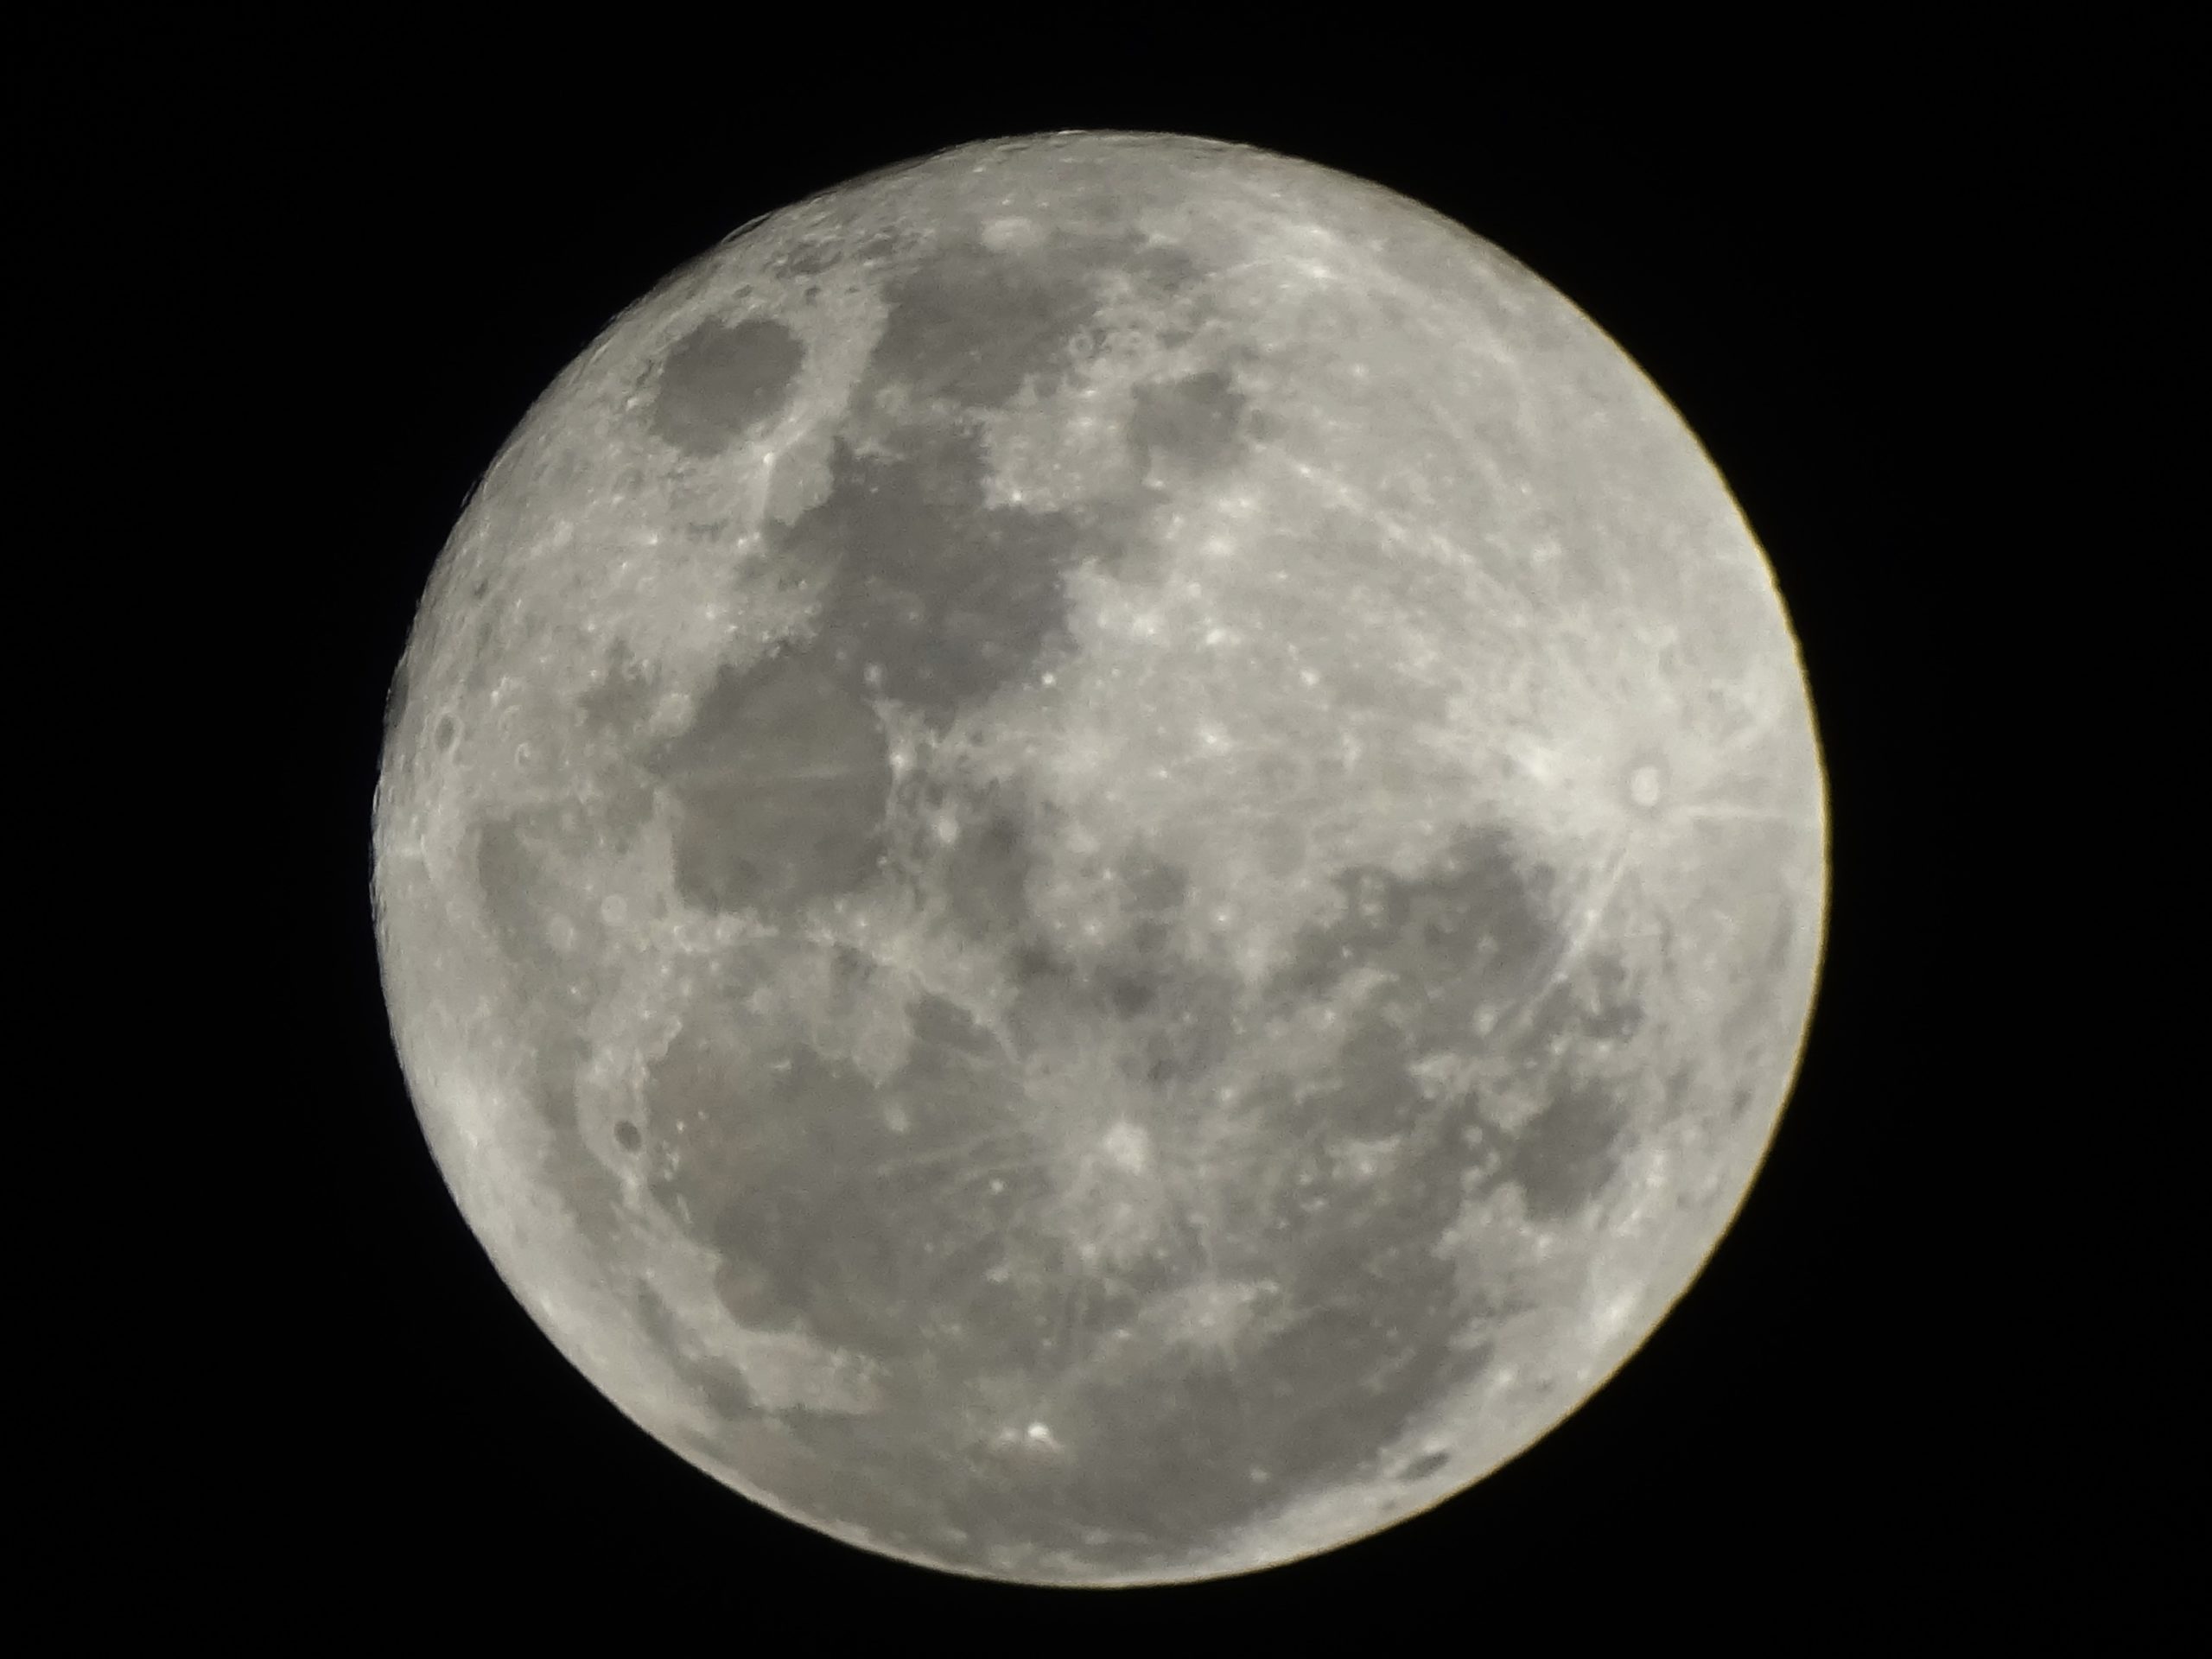 Photograph of the moon zoomed in